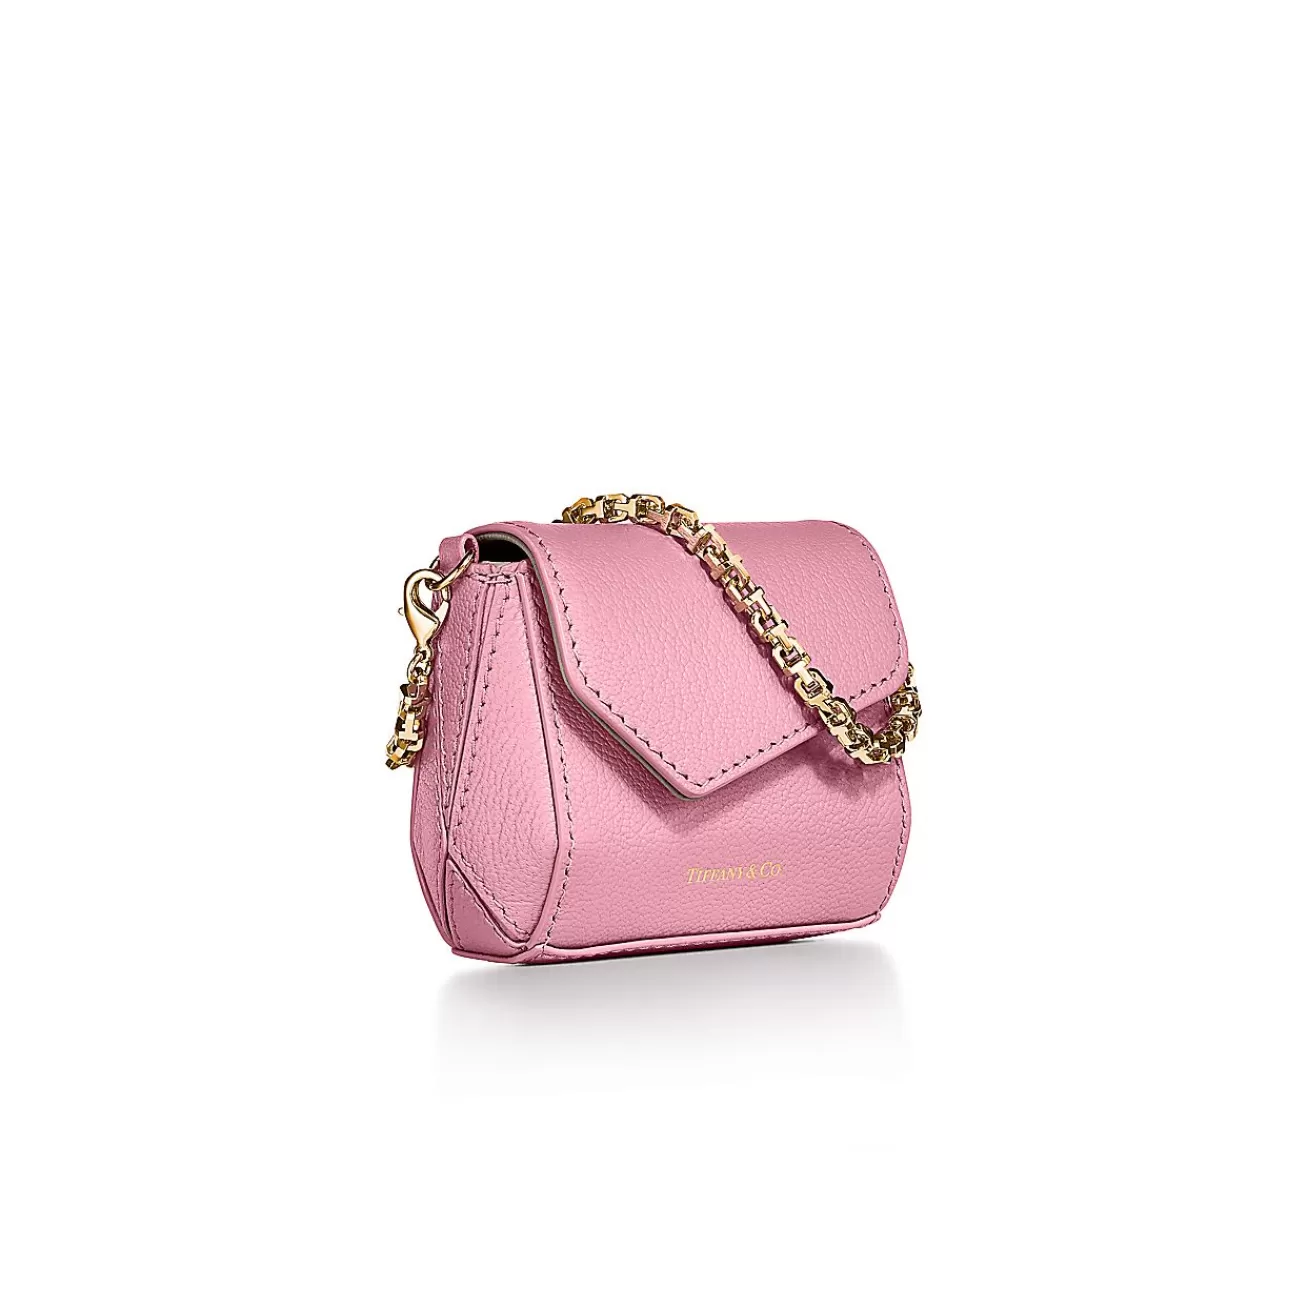 Tiffany & Co. Tiffany T Nano Bag in Morganite Pink Leather | ^Women Small Leather Goods | Women's Accessories